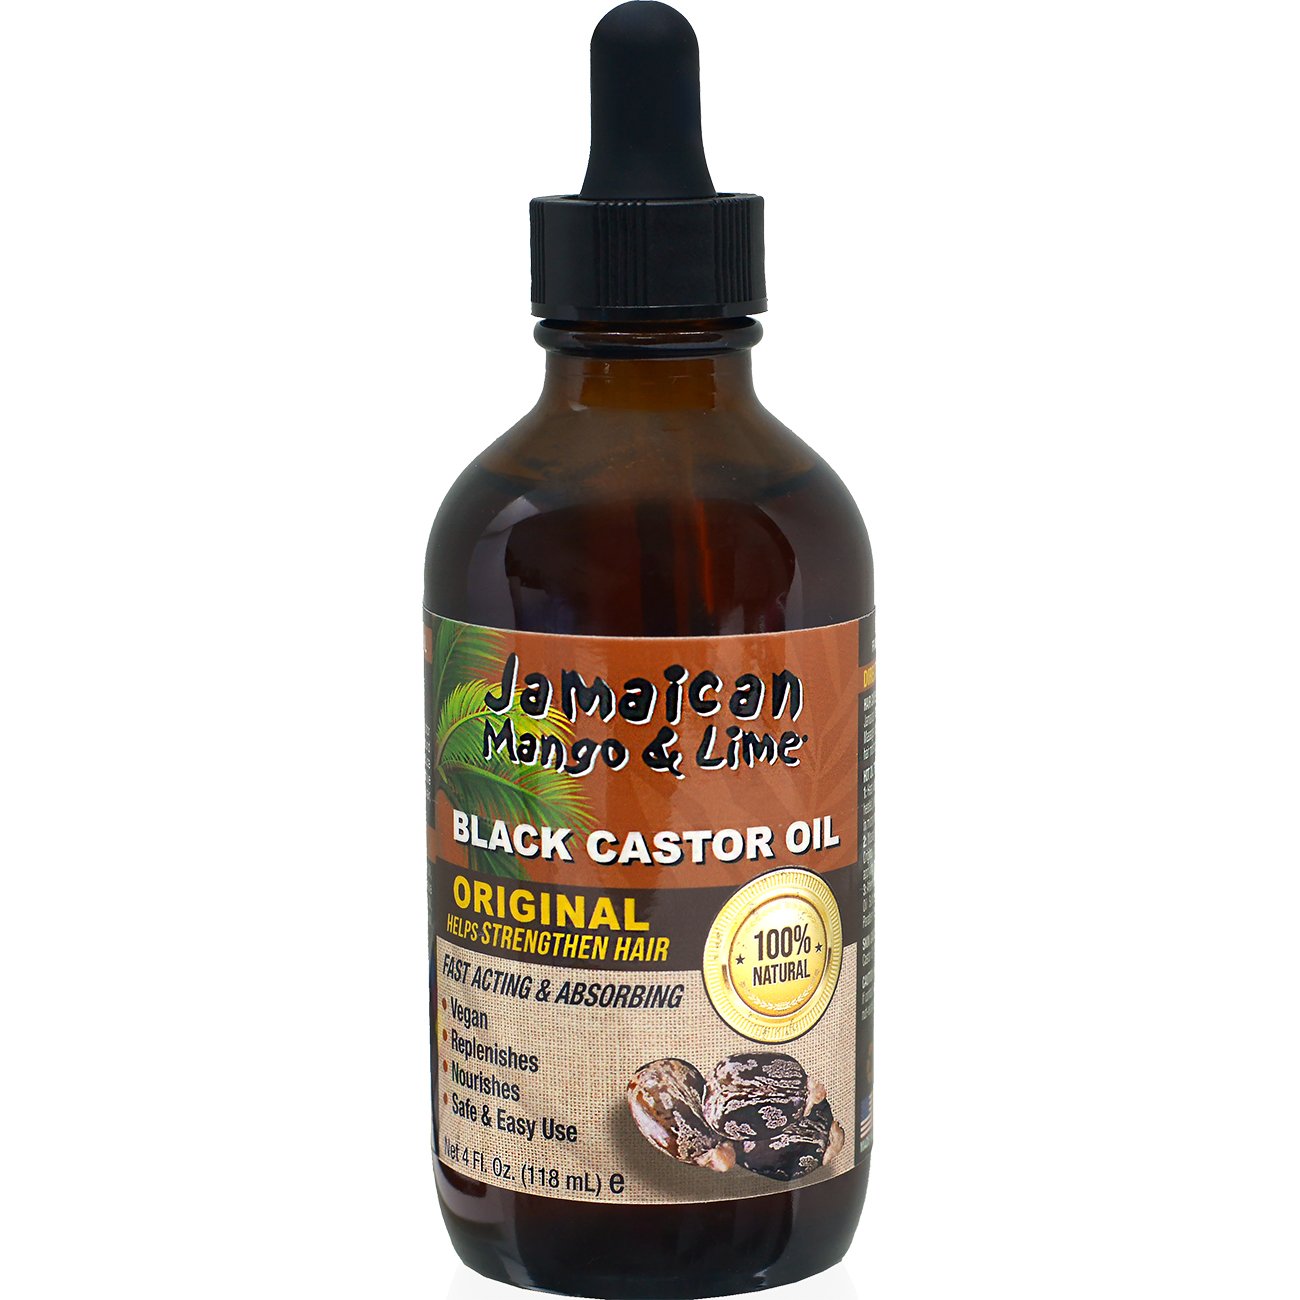 Jamaican Mango & Lime Black Castor Oil Original Shop Styling Products & Treatments at HEB